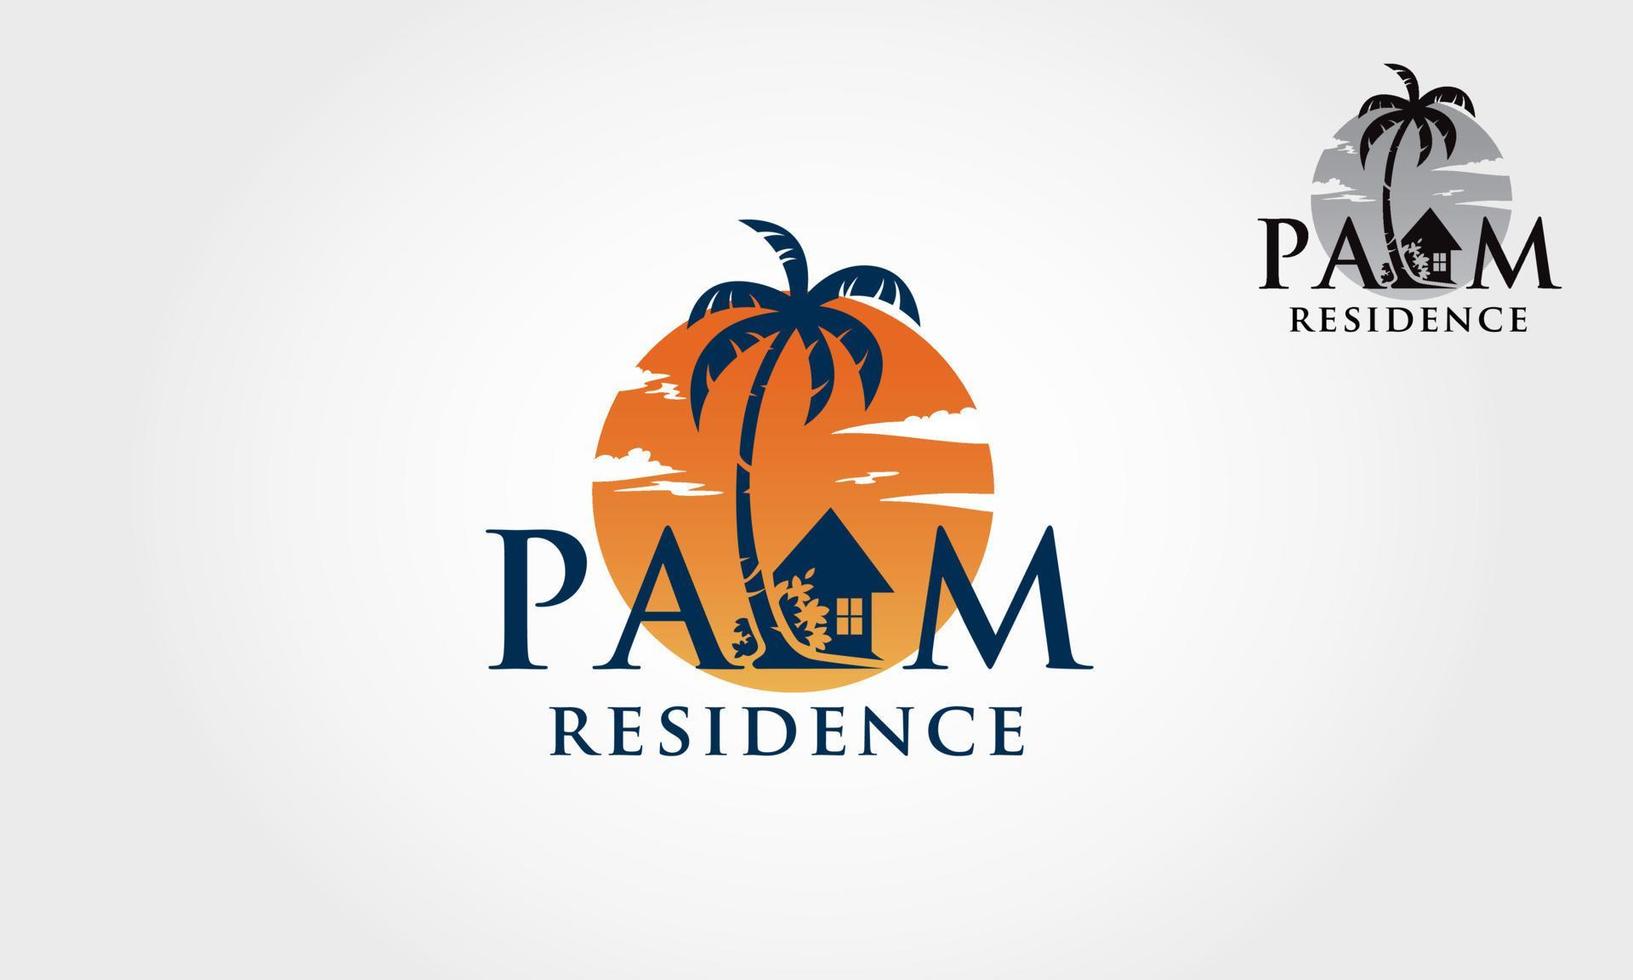 Palm Residence Vector Logo Template. The main symbol of the logo is a palm tree, but here it incorporates with the house this logo symbolizes a neighborhood, protection, peace and growth.